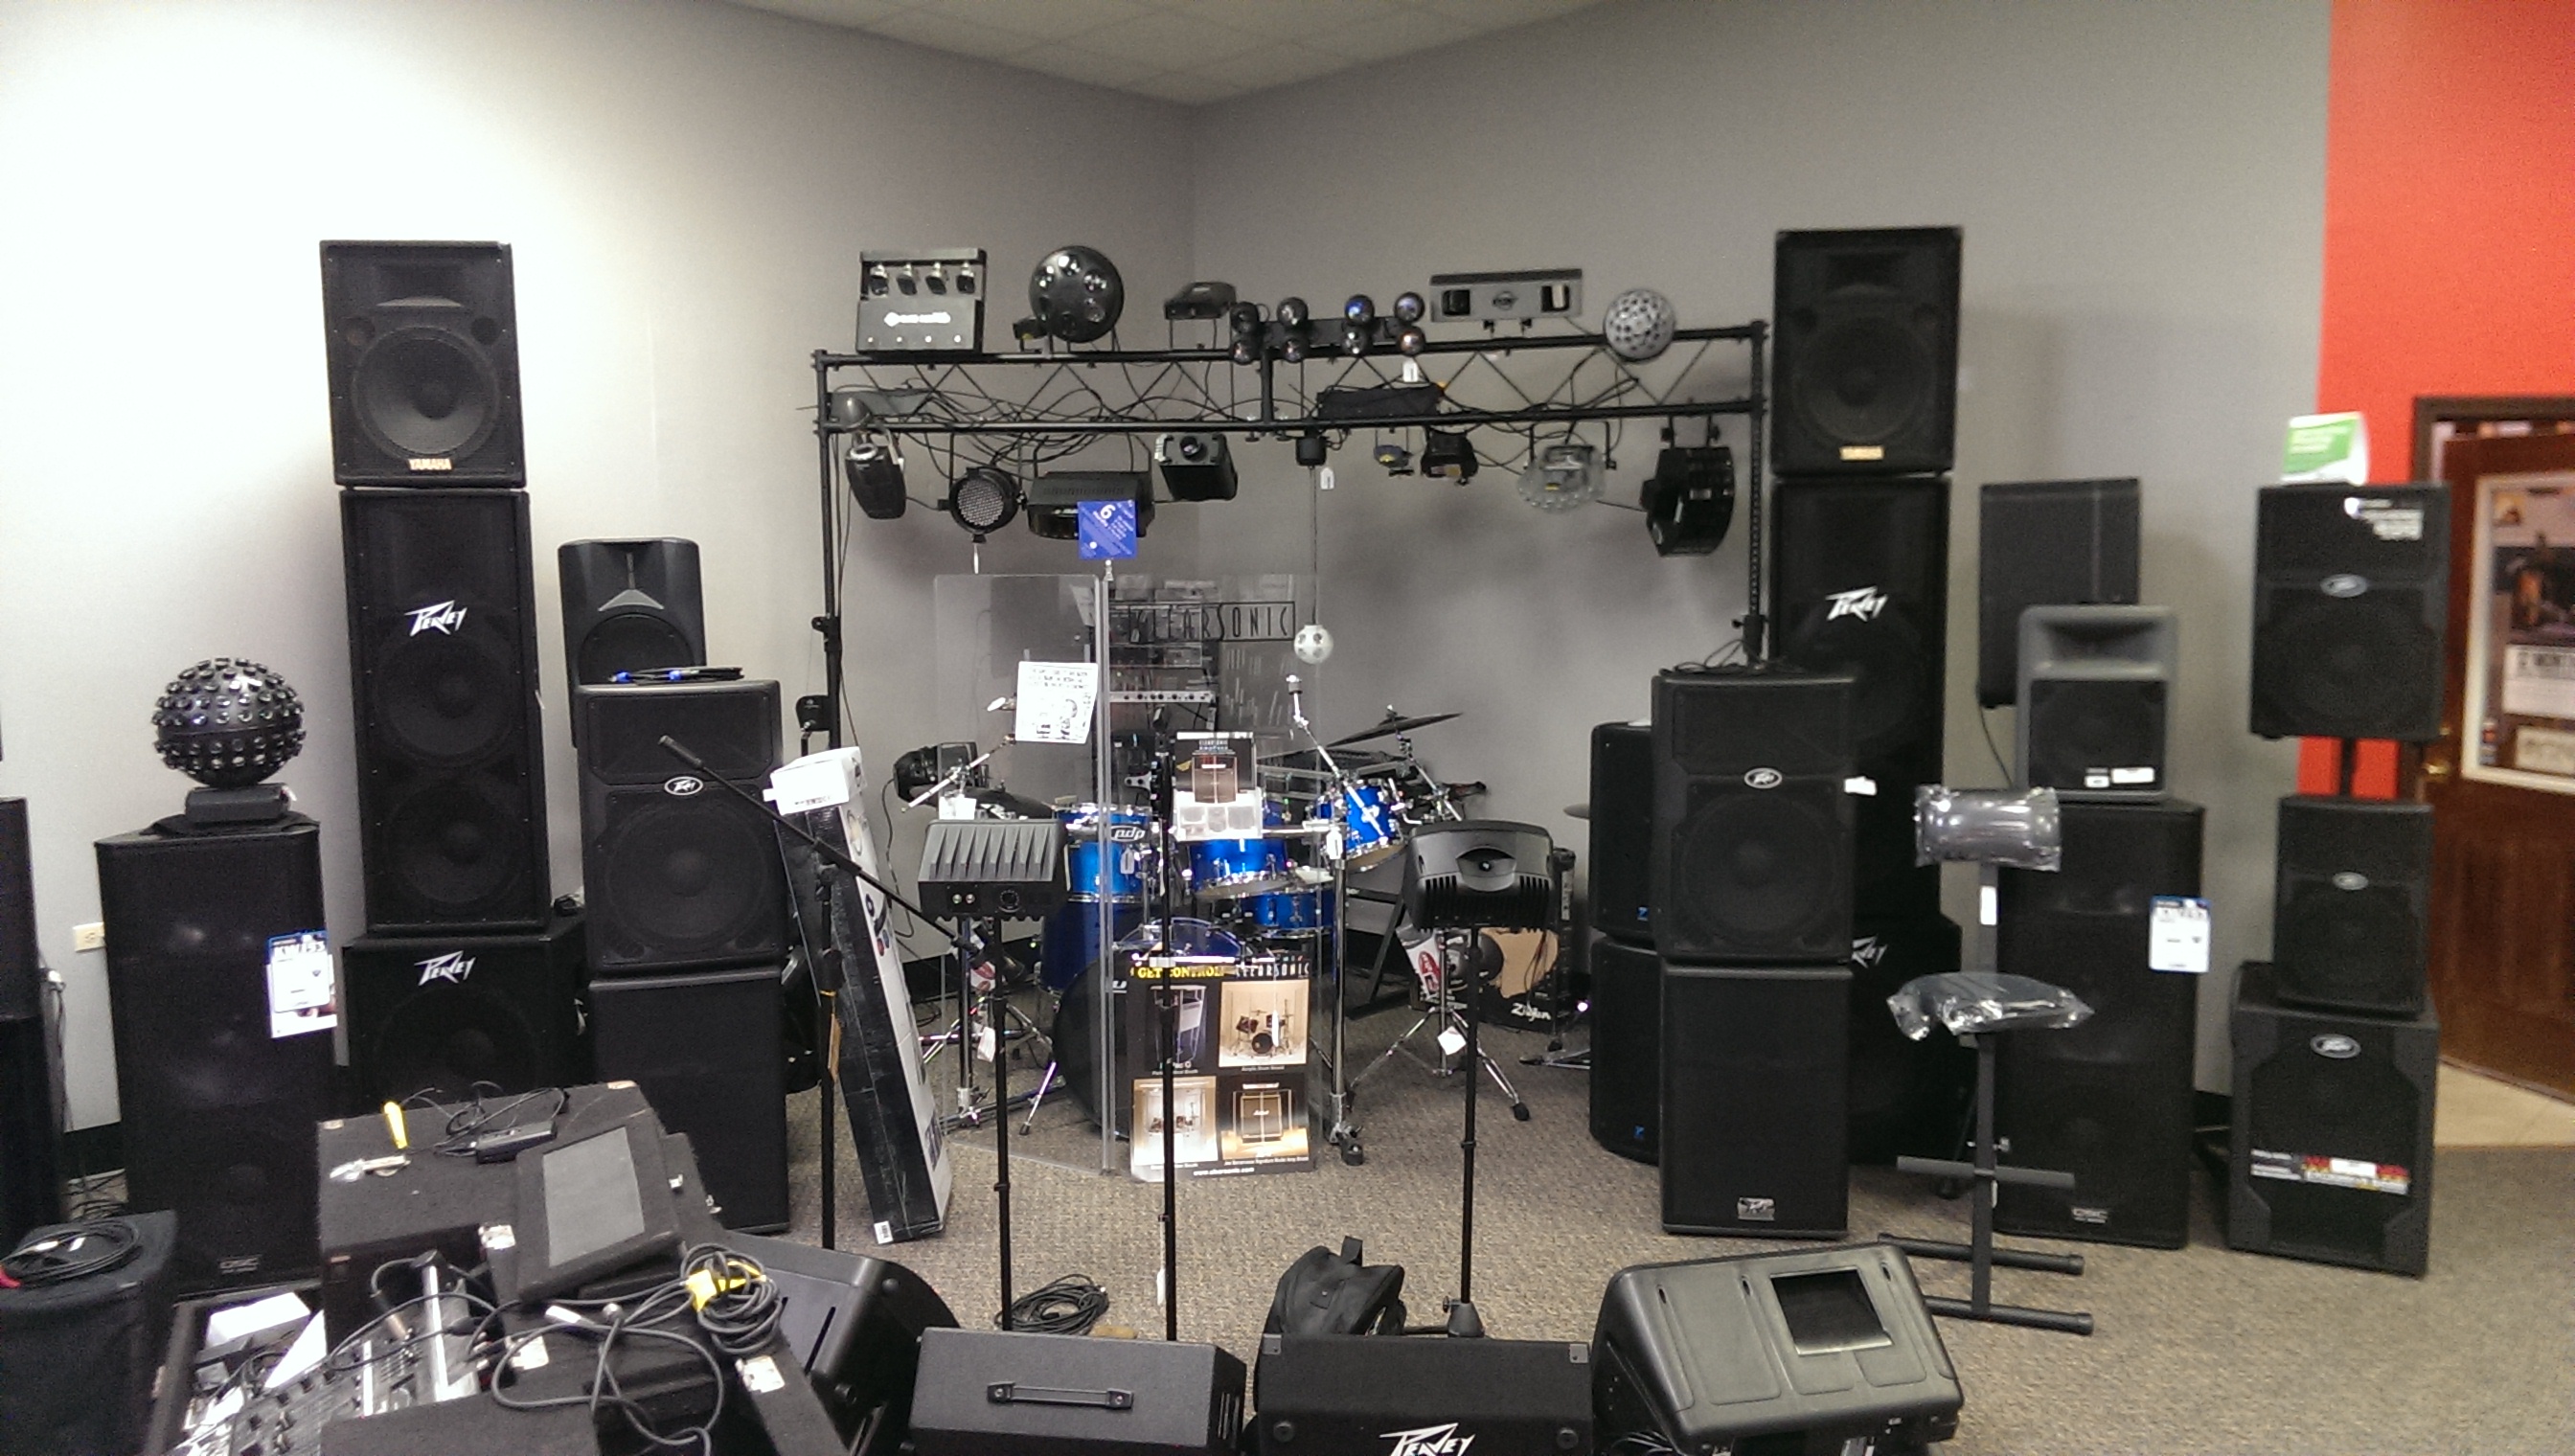 Will West Music and Sound is your one stop shop for all things music... Especially Live Sound and Lighting! QSC, YAMAHA, JBL, and so much more! 